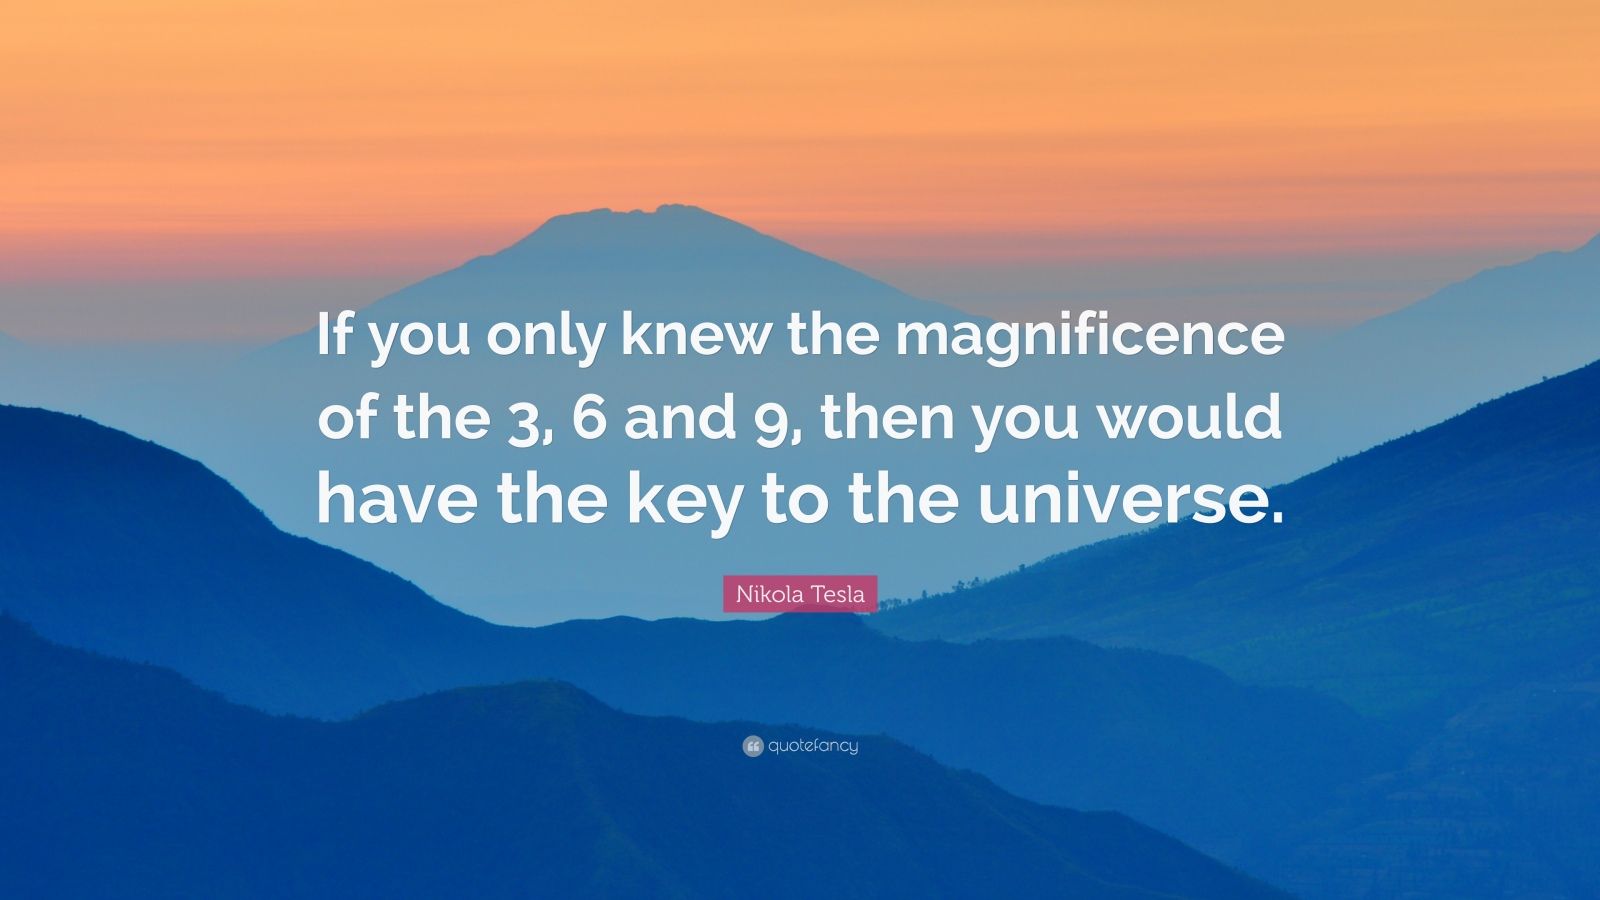 Nikola Tesla Quote: "If you only knew the magnificence of the 3, 6 and 9, then you would have ...